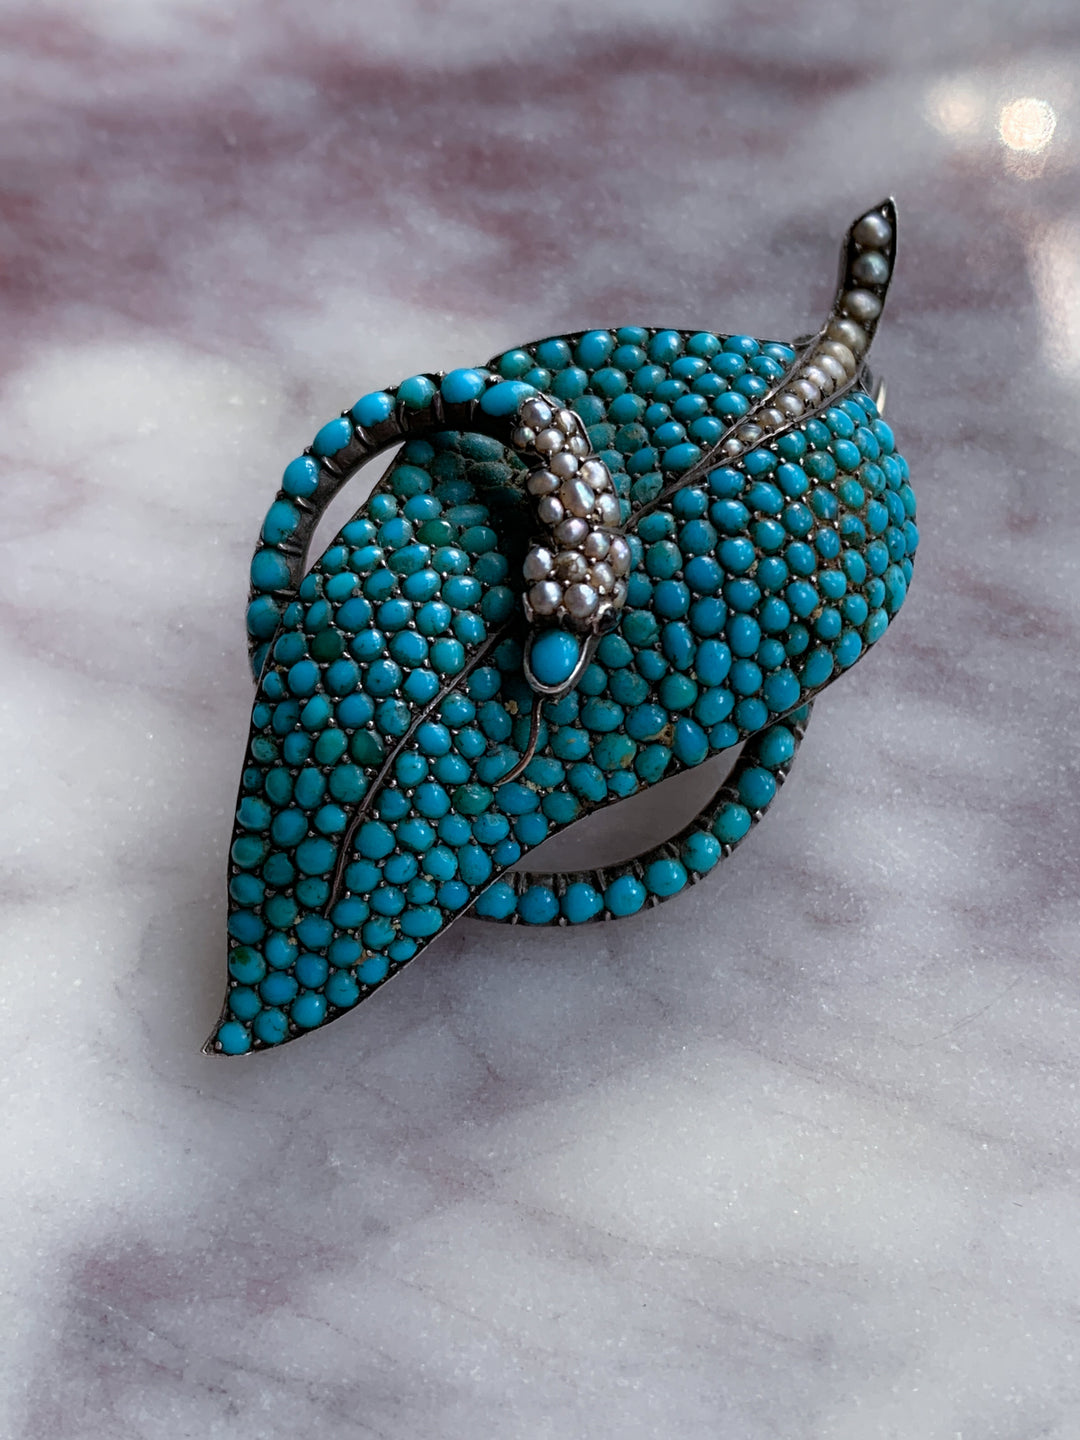 Sterling Victorian Serpent Brooch of 2” in Pearl, Turquoise and Garnet